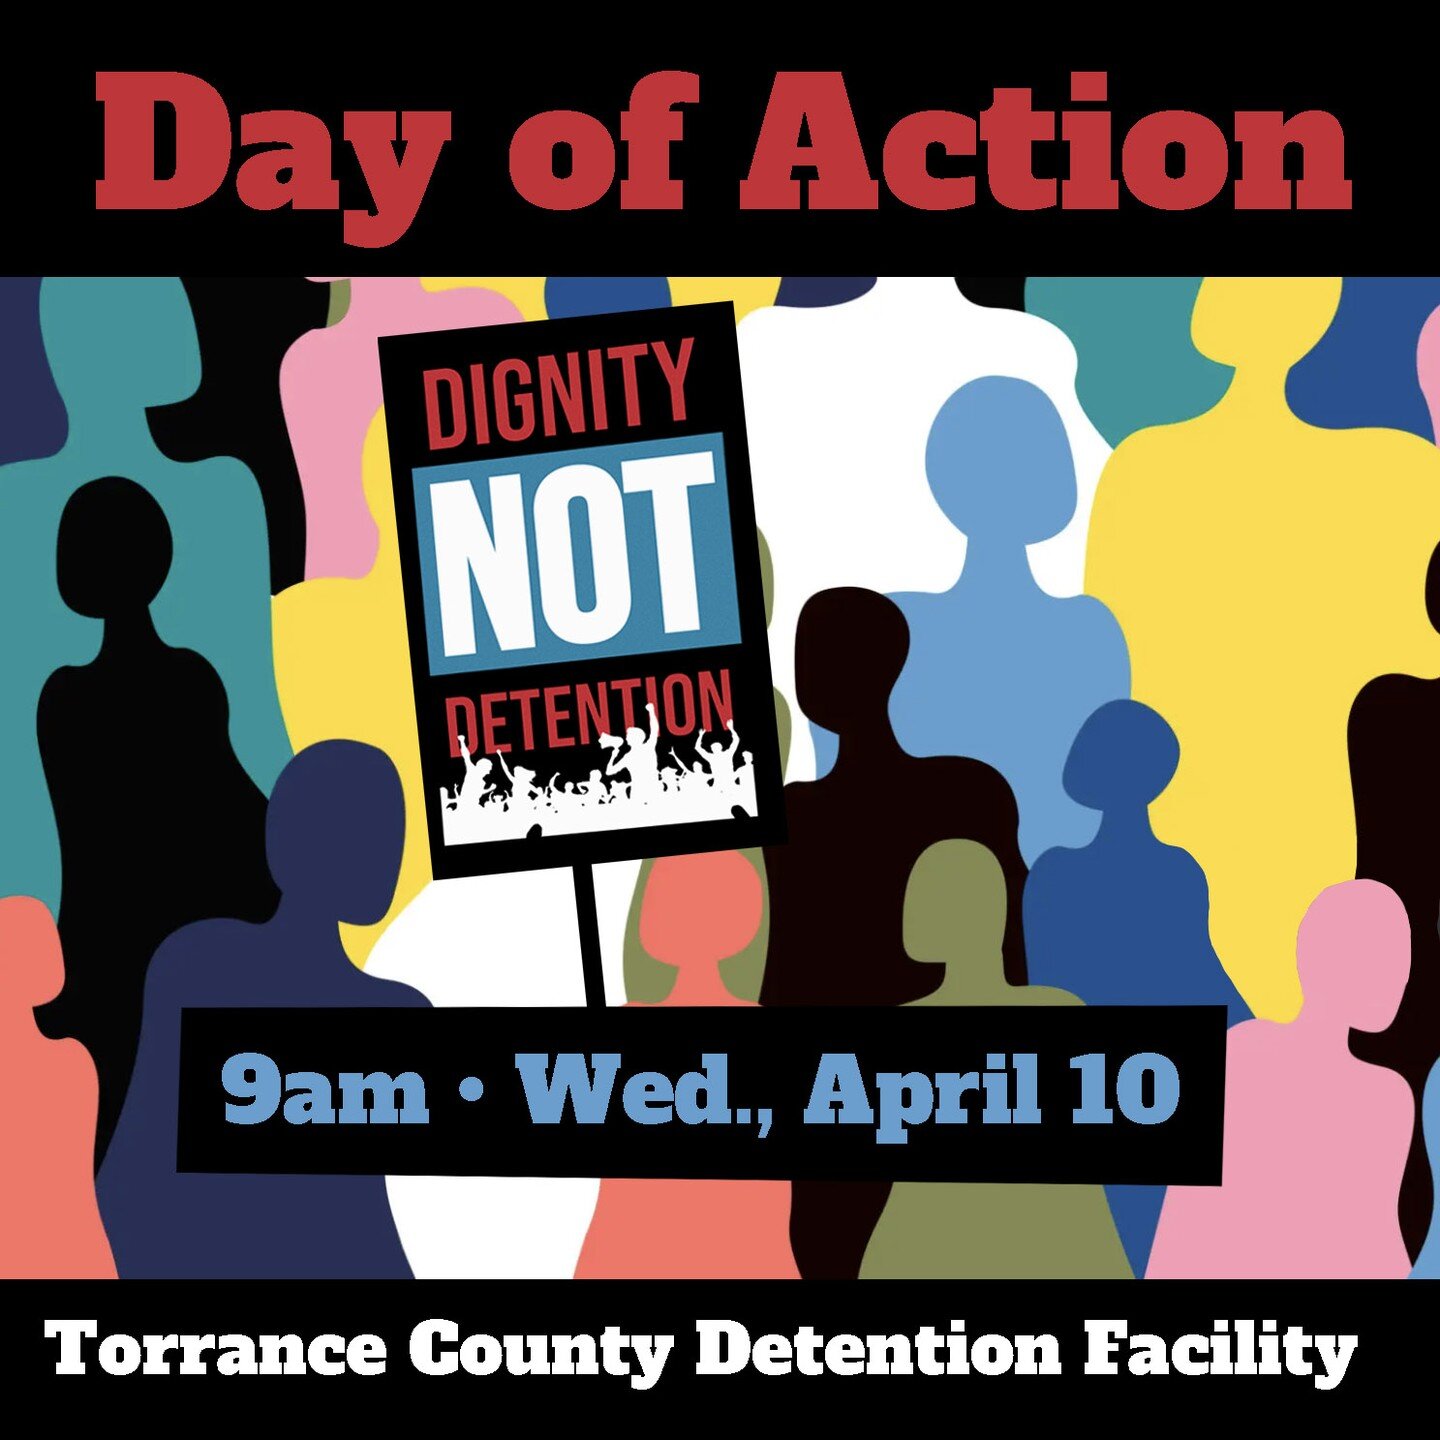 On Wednesday, April 10, the Dignity Not Detention Coalition will continue its fight against the needless detention of asylum seekers in New Mexico by holding a Day of Action in Estancia. Beginning at 8:45am, we will be reading the personal testimonie